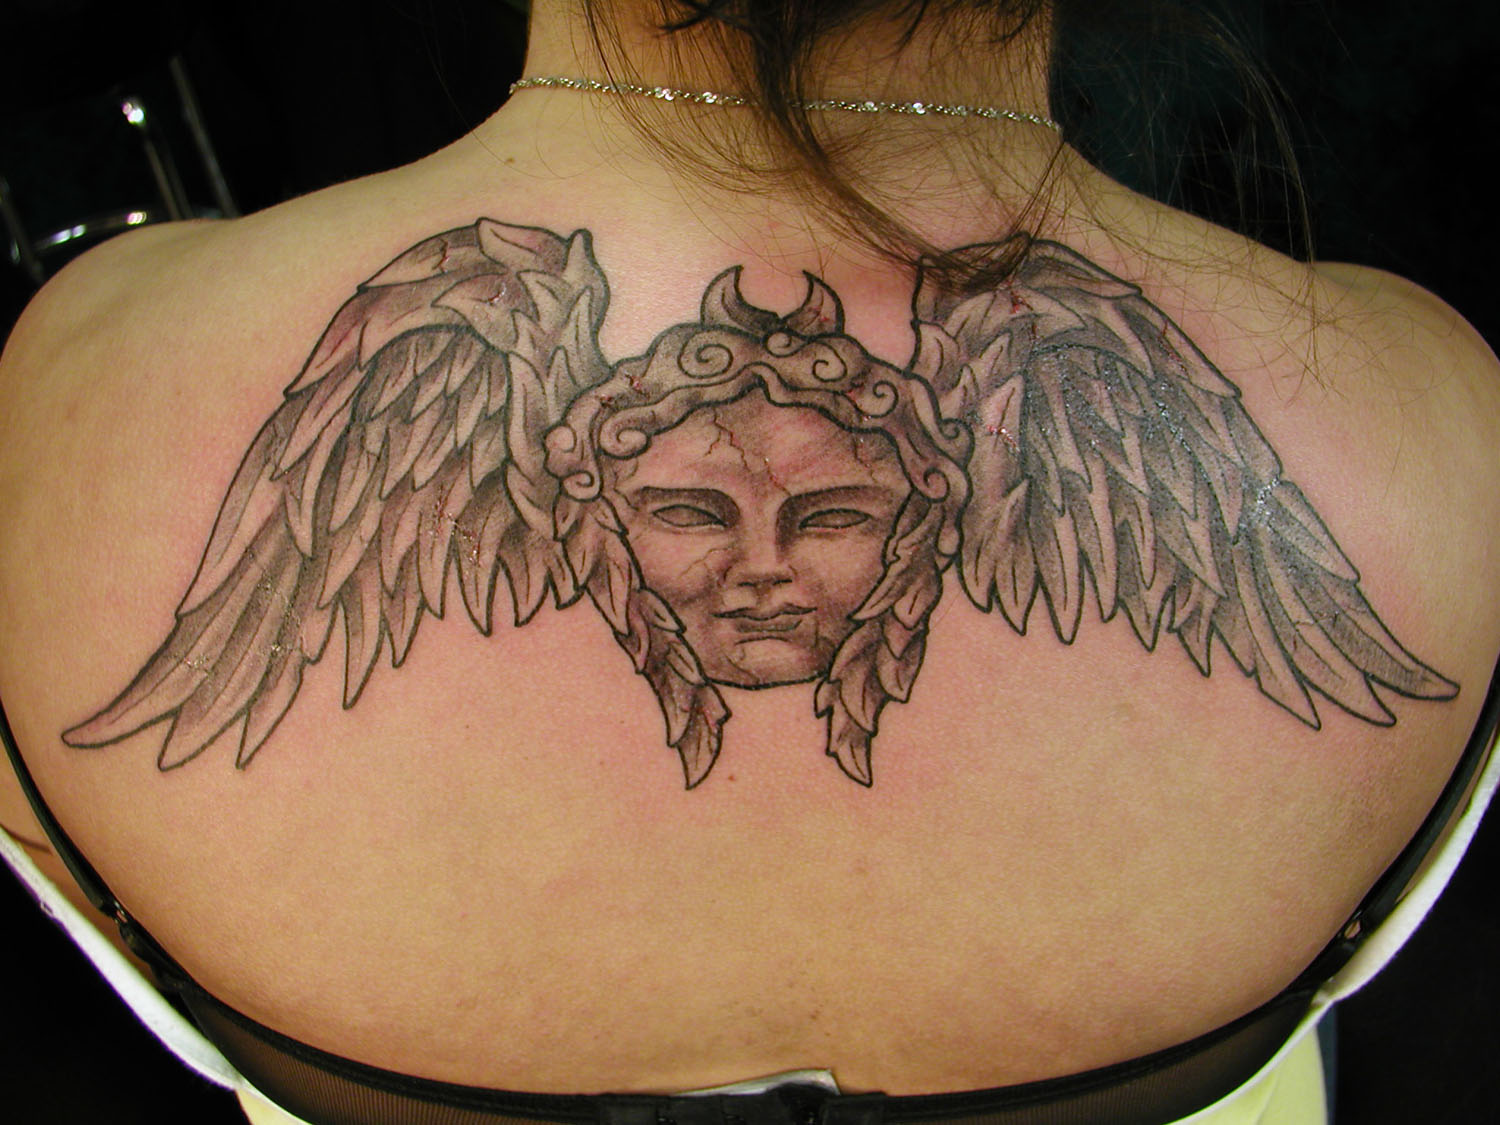 Infinite Tattoo greenfield park  Stone angel by Mike  Facebook